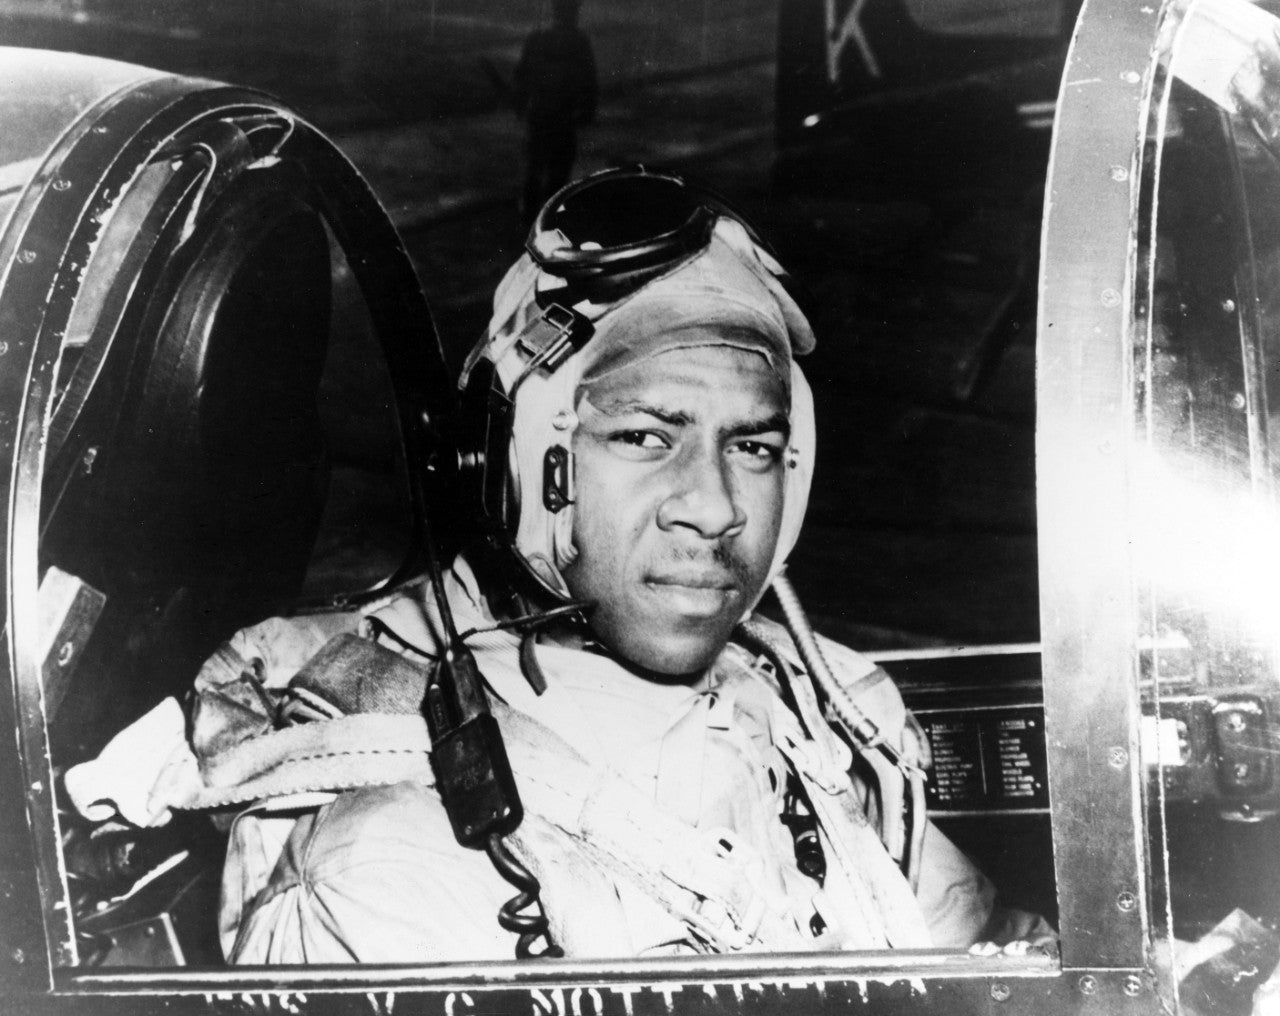 Jesse L. Brown was the first African American to complete U.S. Navy flight training and the first African American naval aviator in combat and to be killed in combat